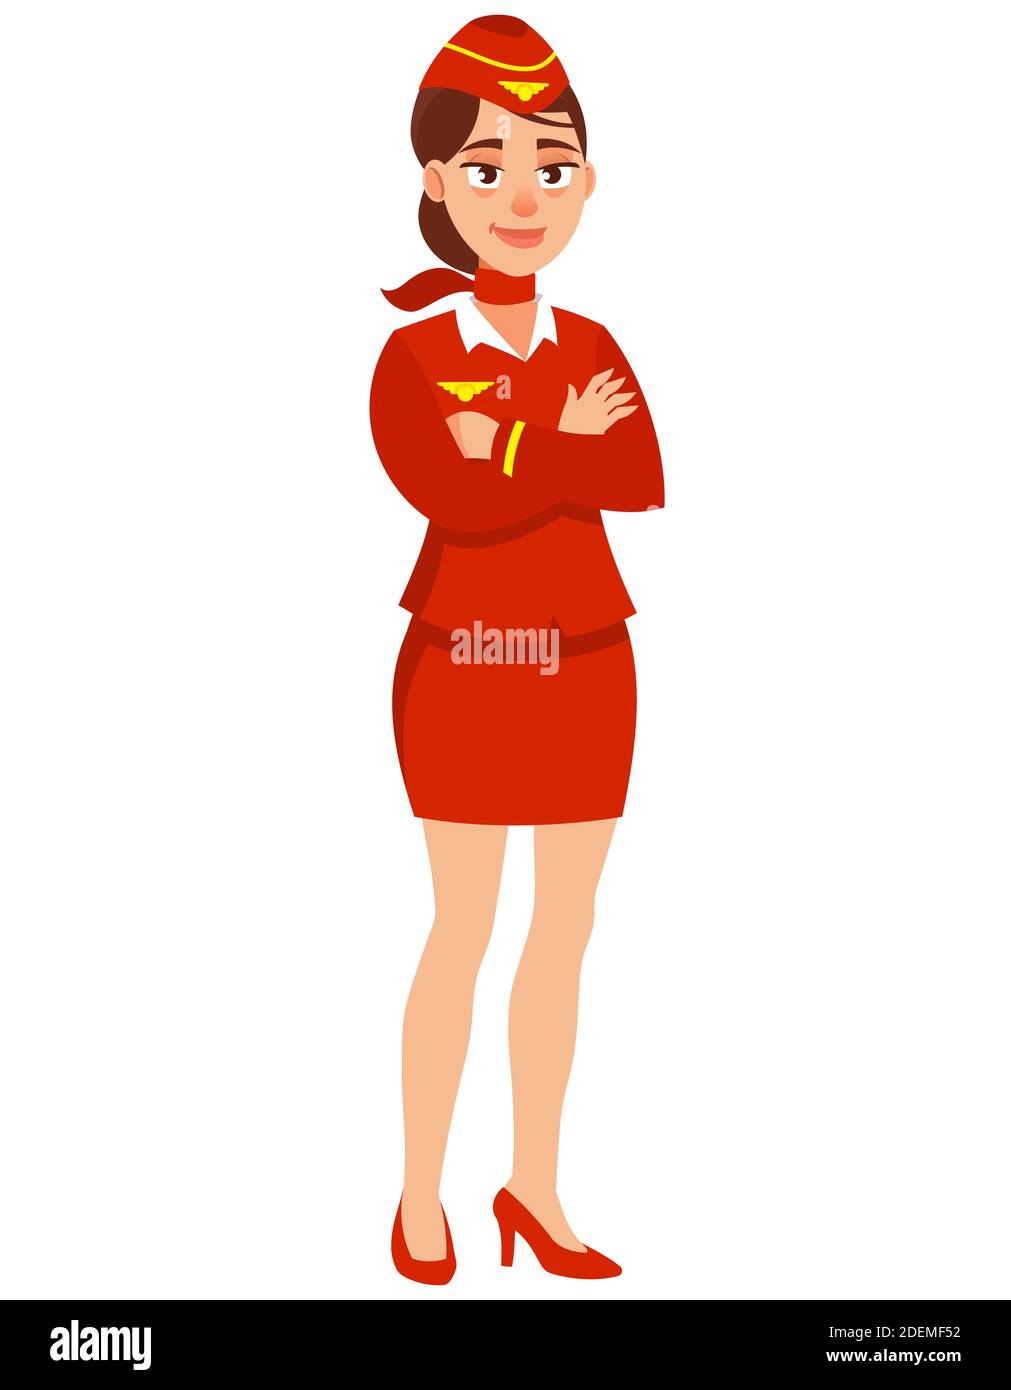 Stewardess with her arms crossed. Female character in cartoon style. Stock Vector